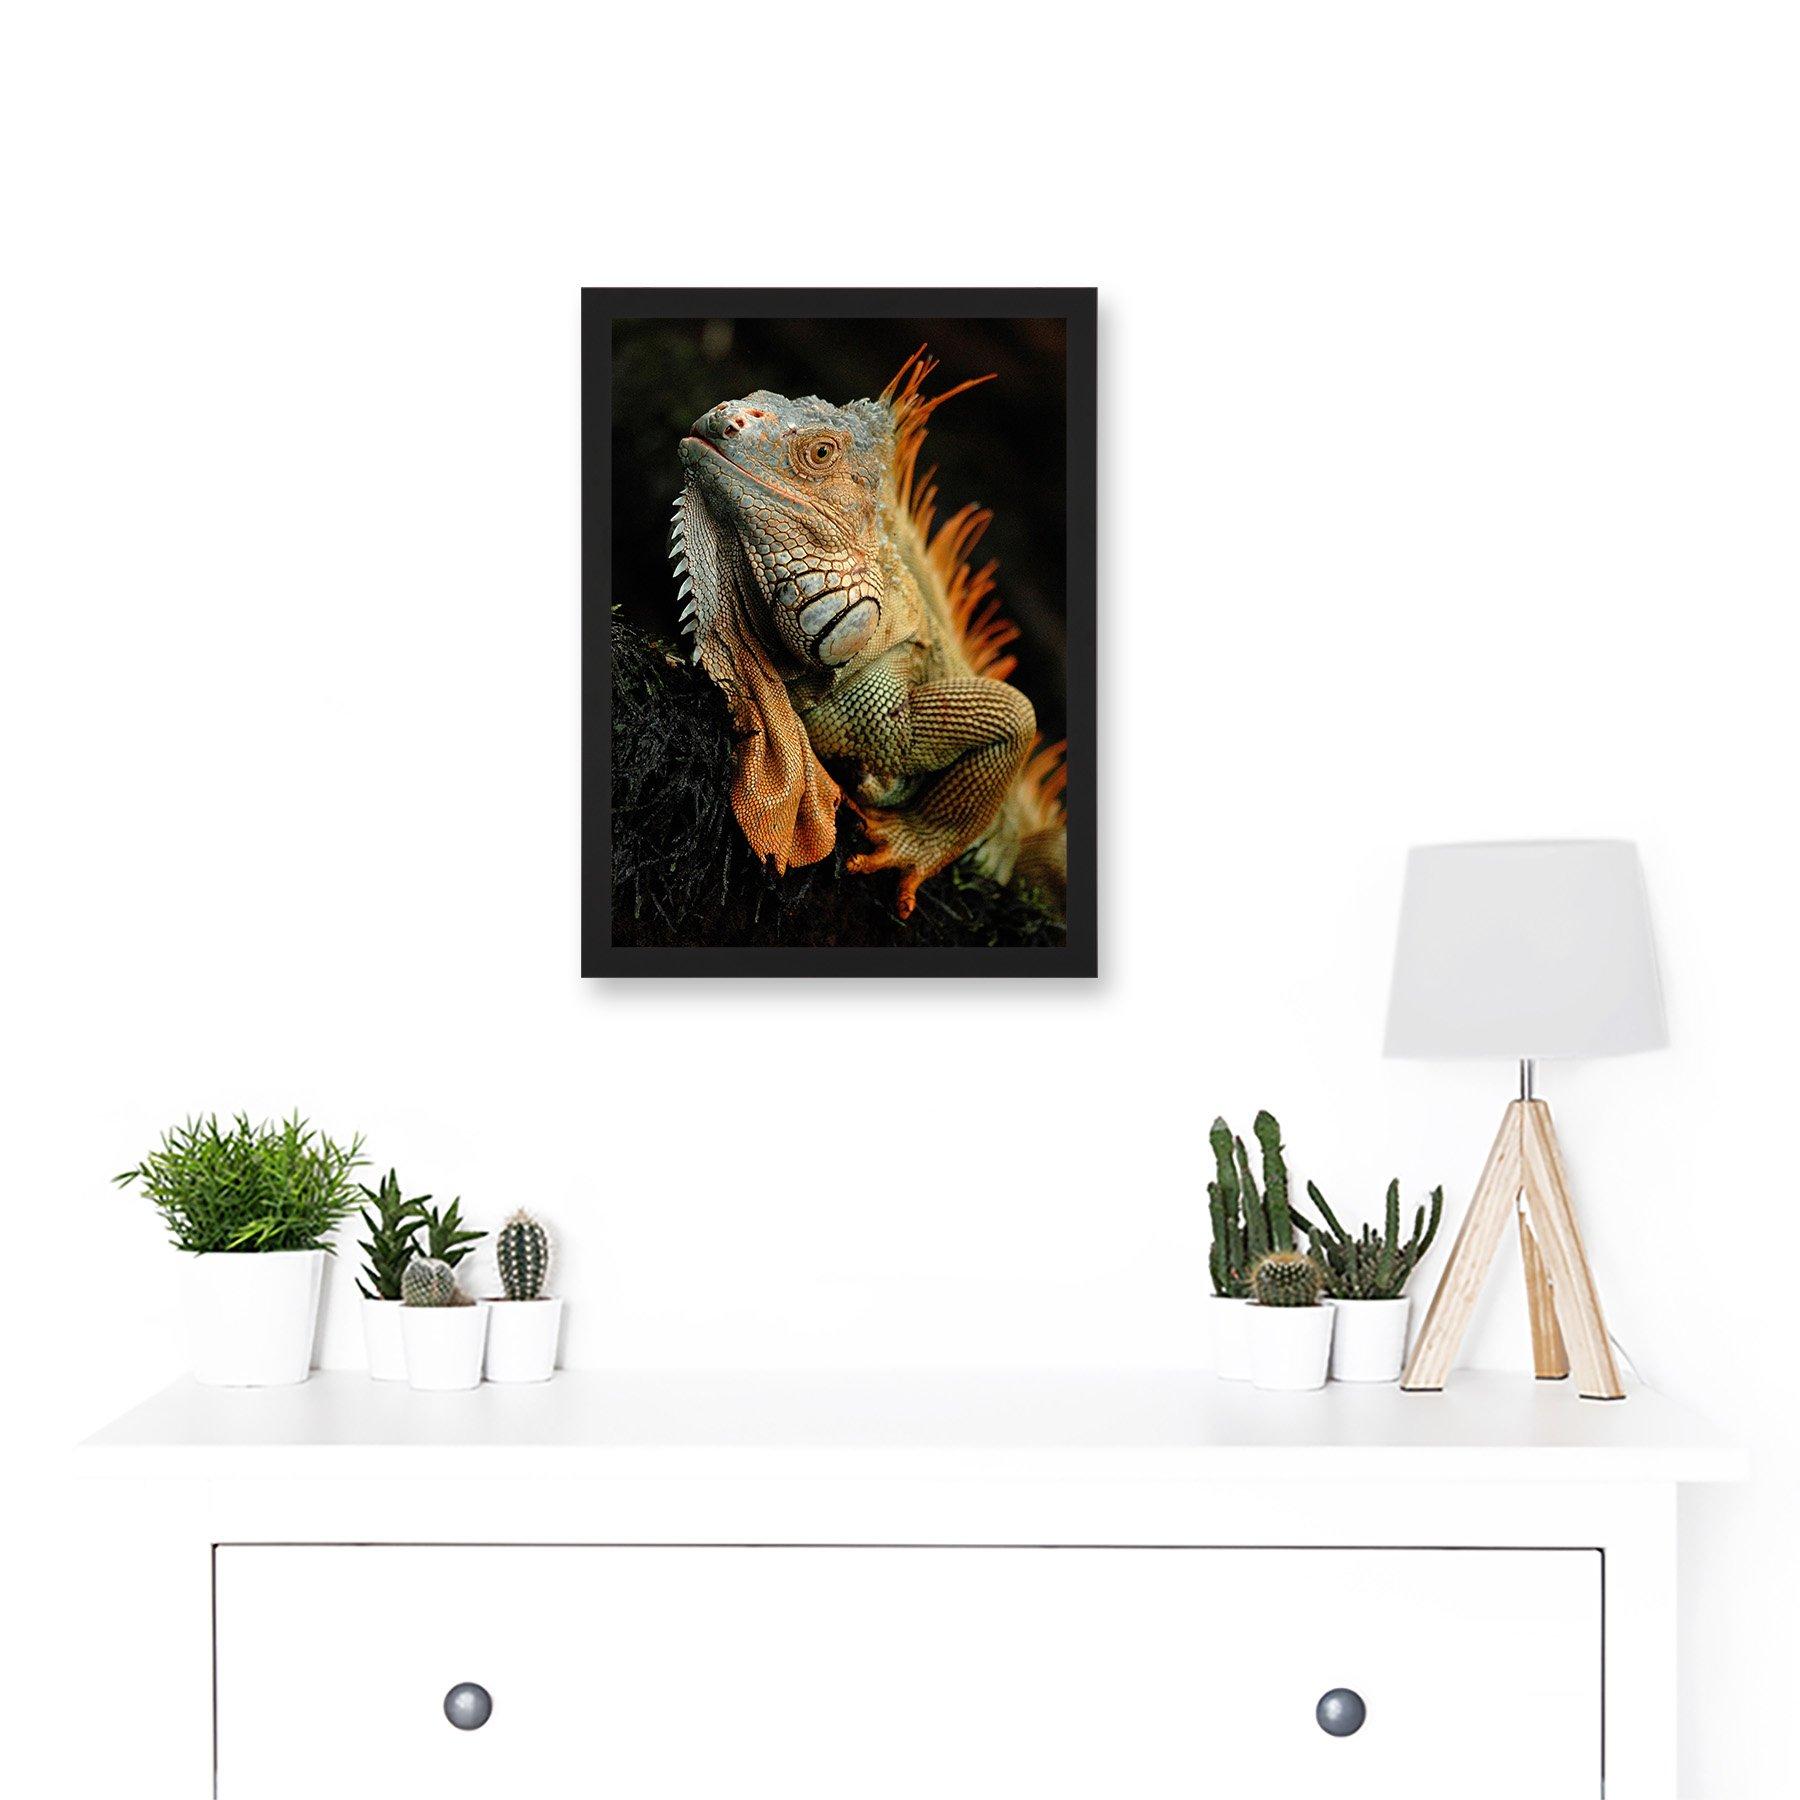  Photo Animal Iguana Lizard Reptile Scales Spines Artwork Framed  A3 Wall Art Print: Posters & Prints